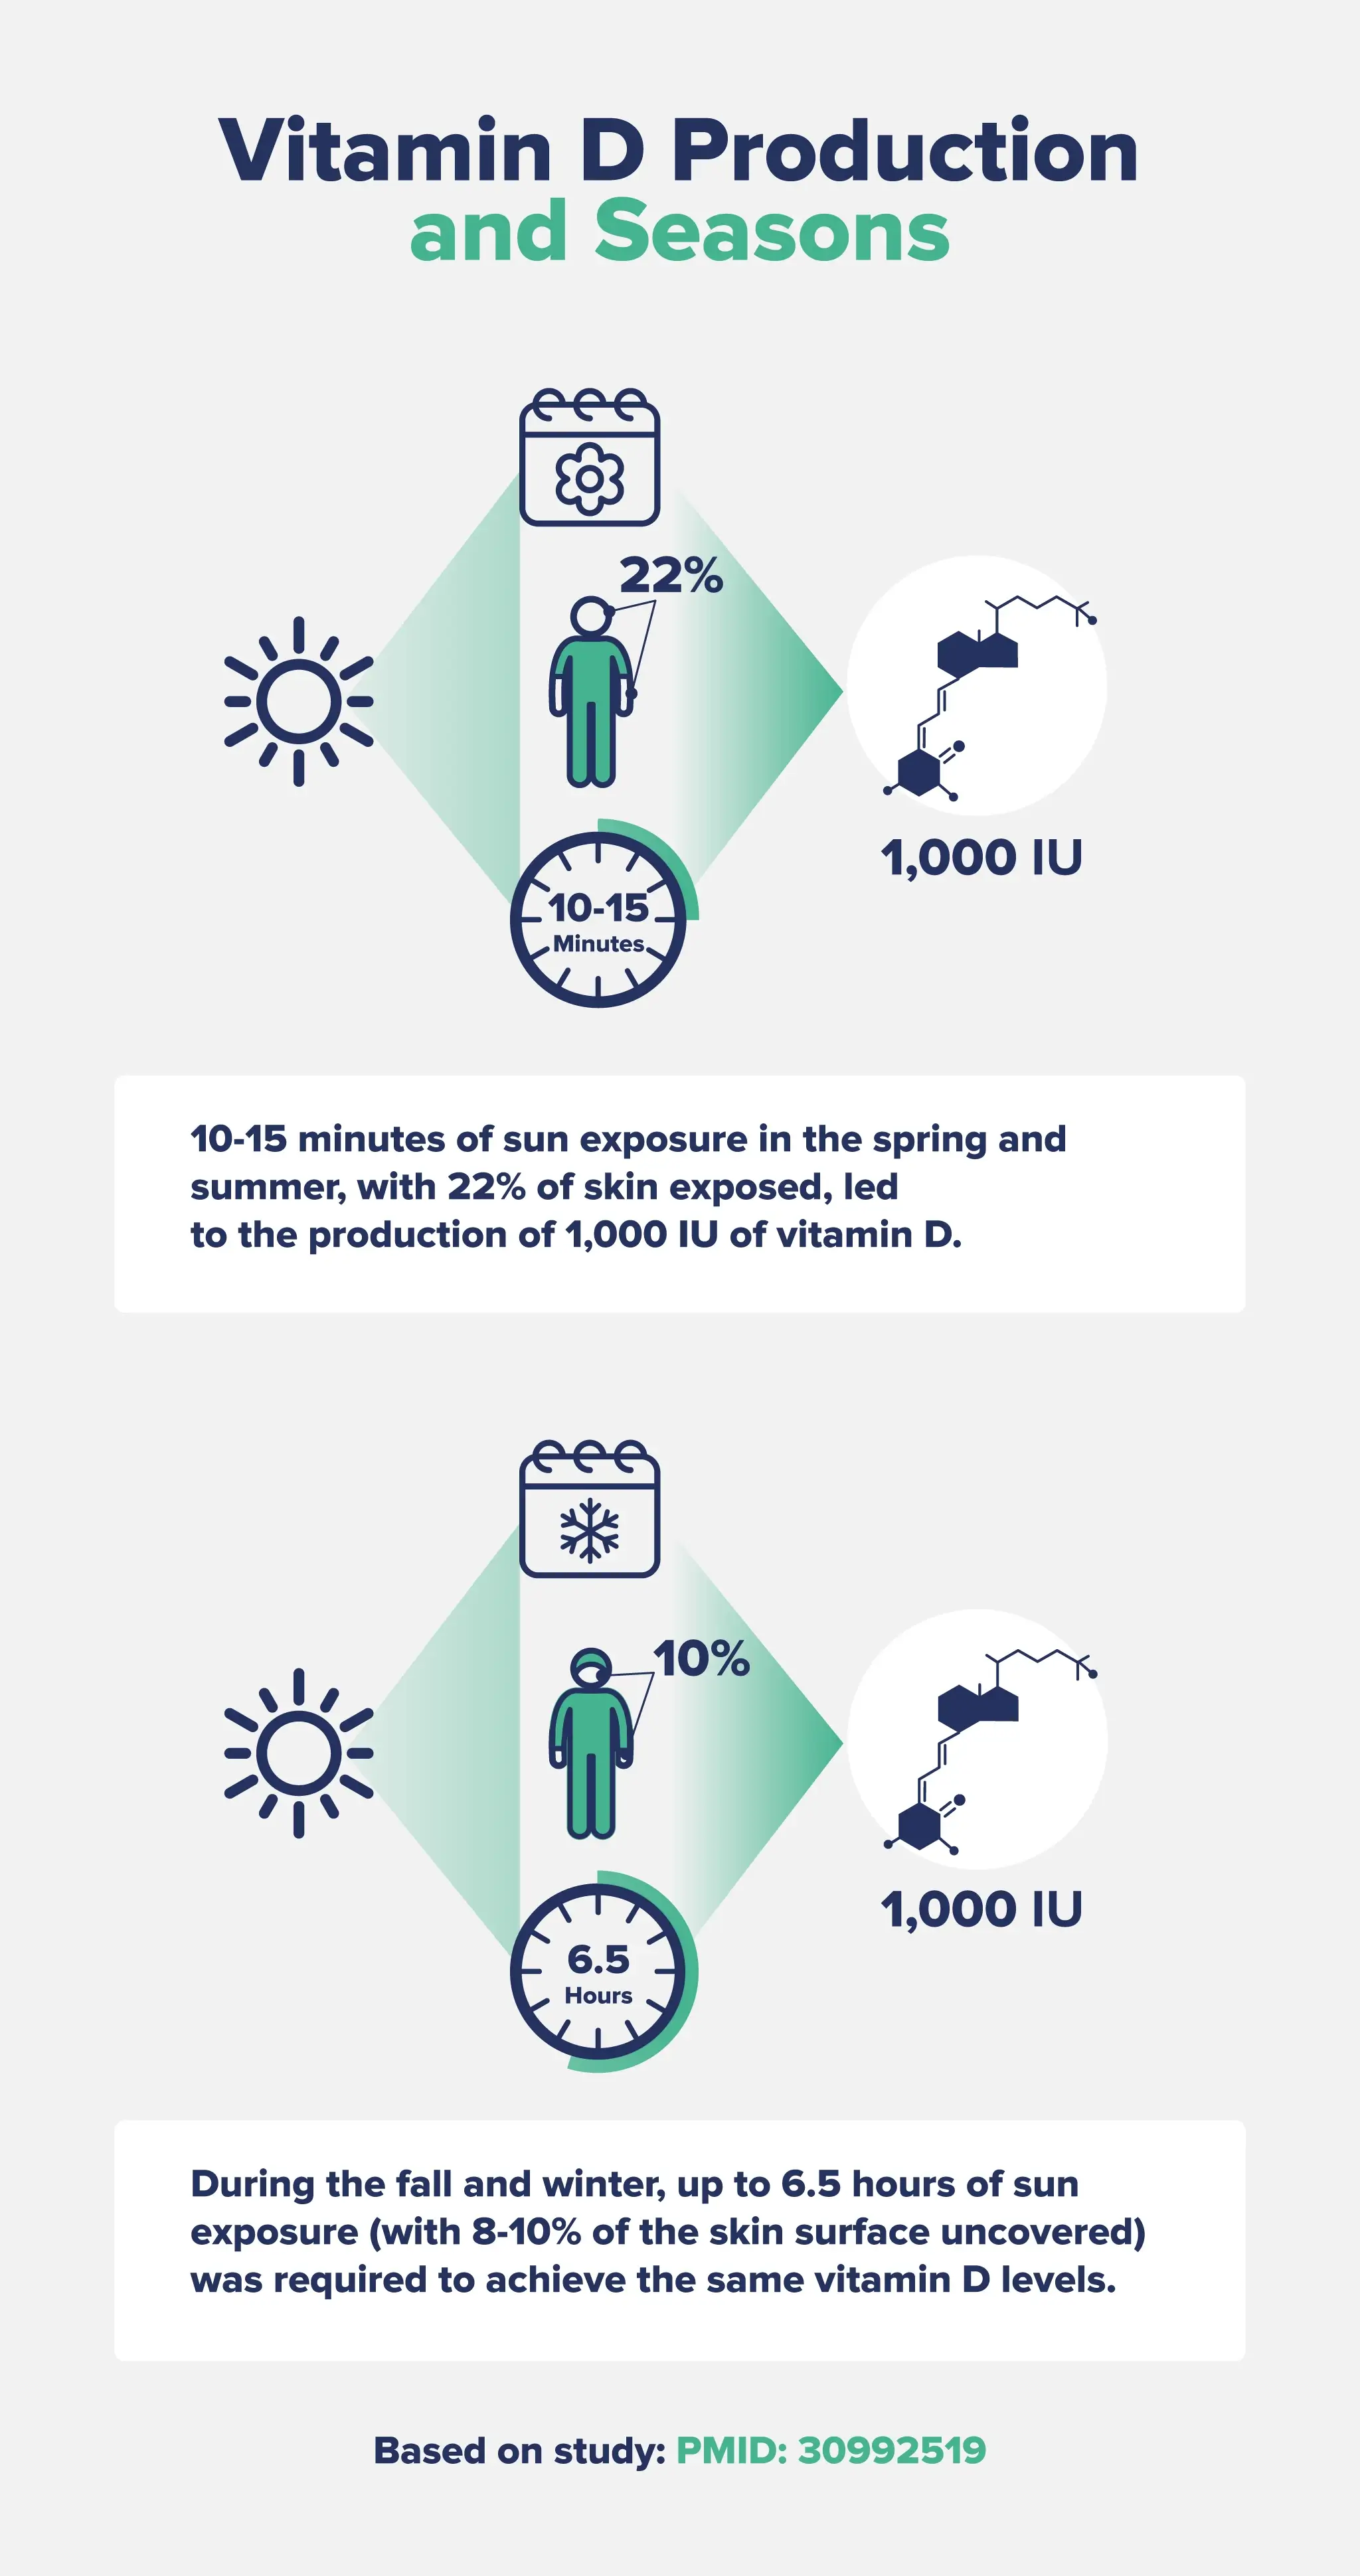 Infographic listing out statistic on season alexposure to sun exposure and vitamin D production.